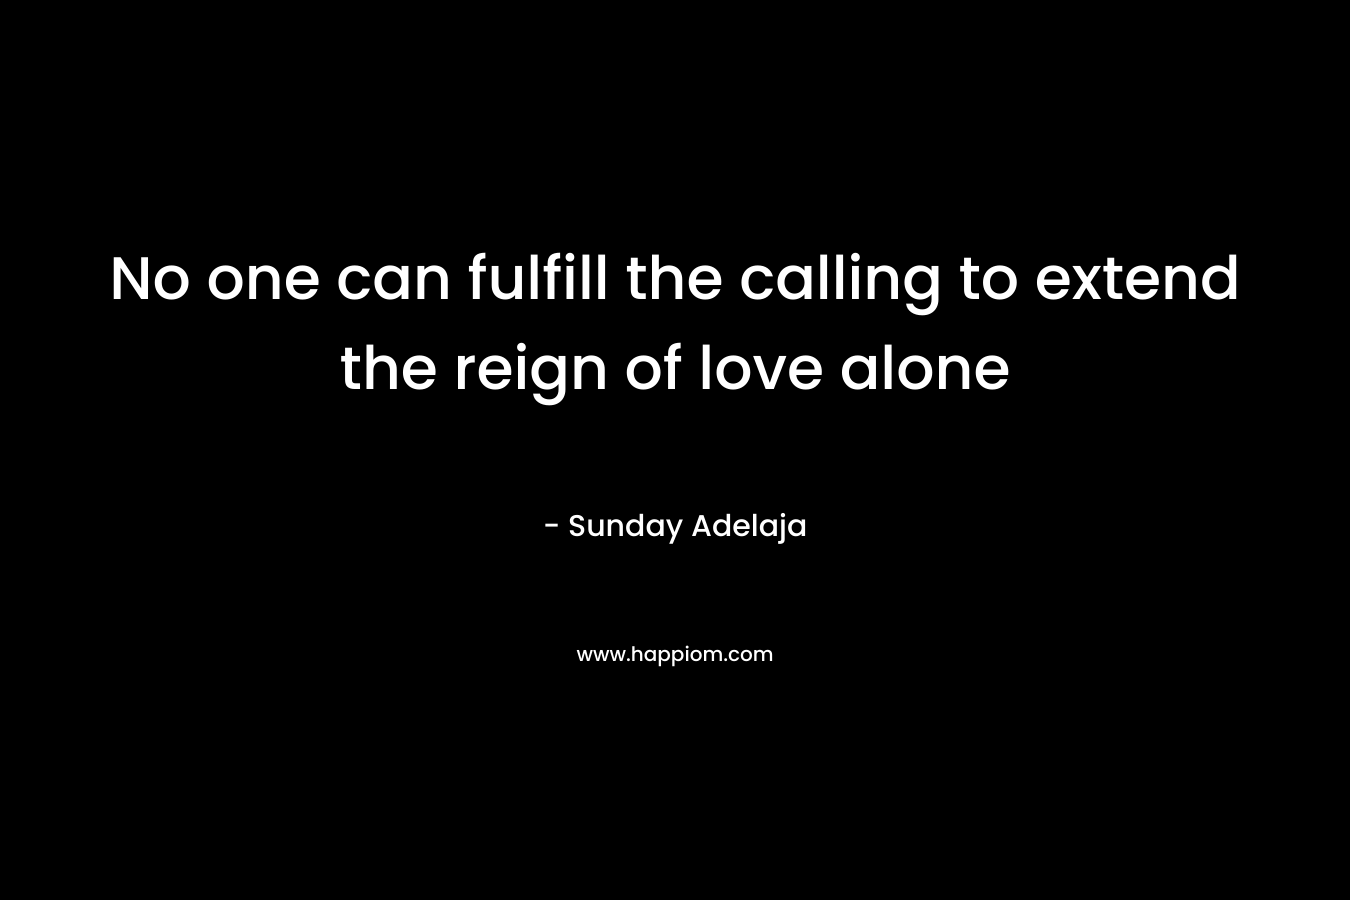 No one can fulfill the calling to extend the reign of love alone